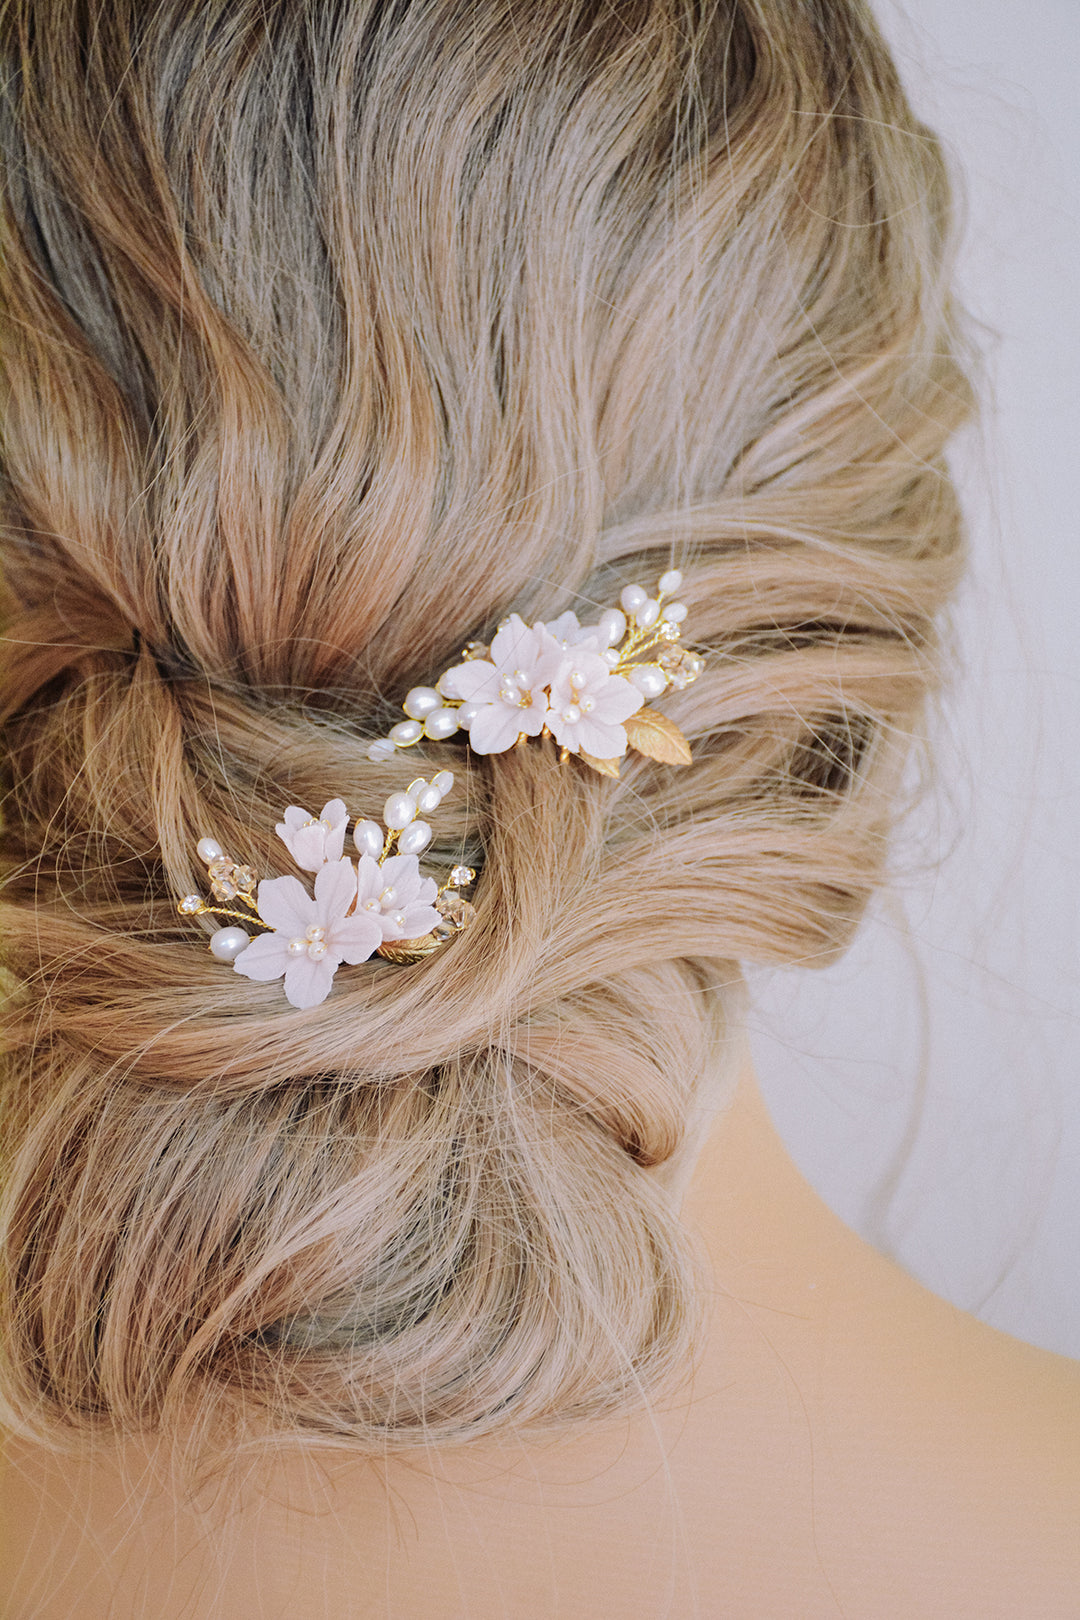 Blush bridal hair combs worn in a messy updo hairstyle.